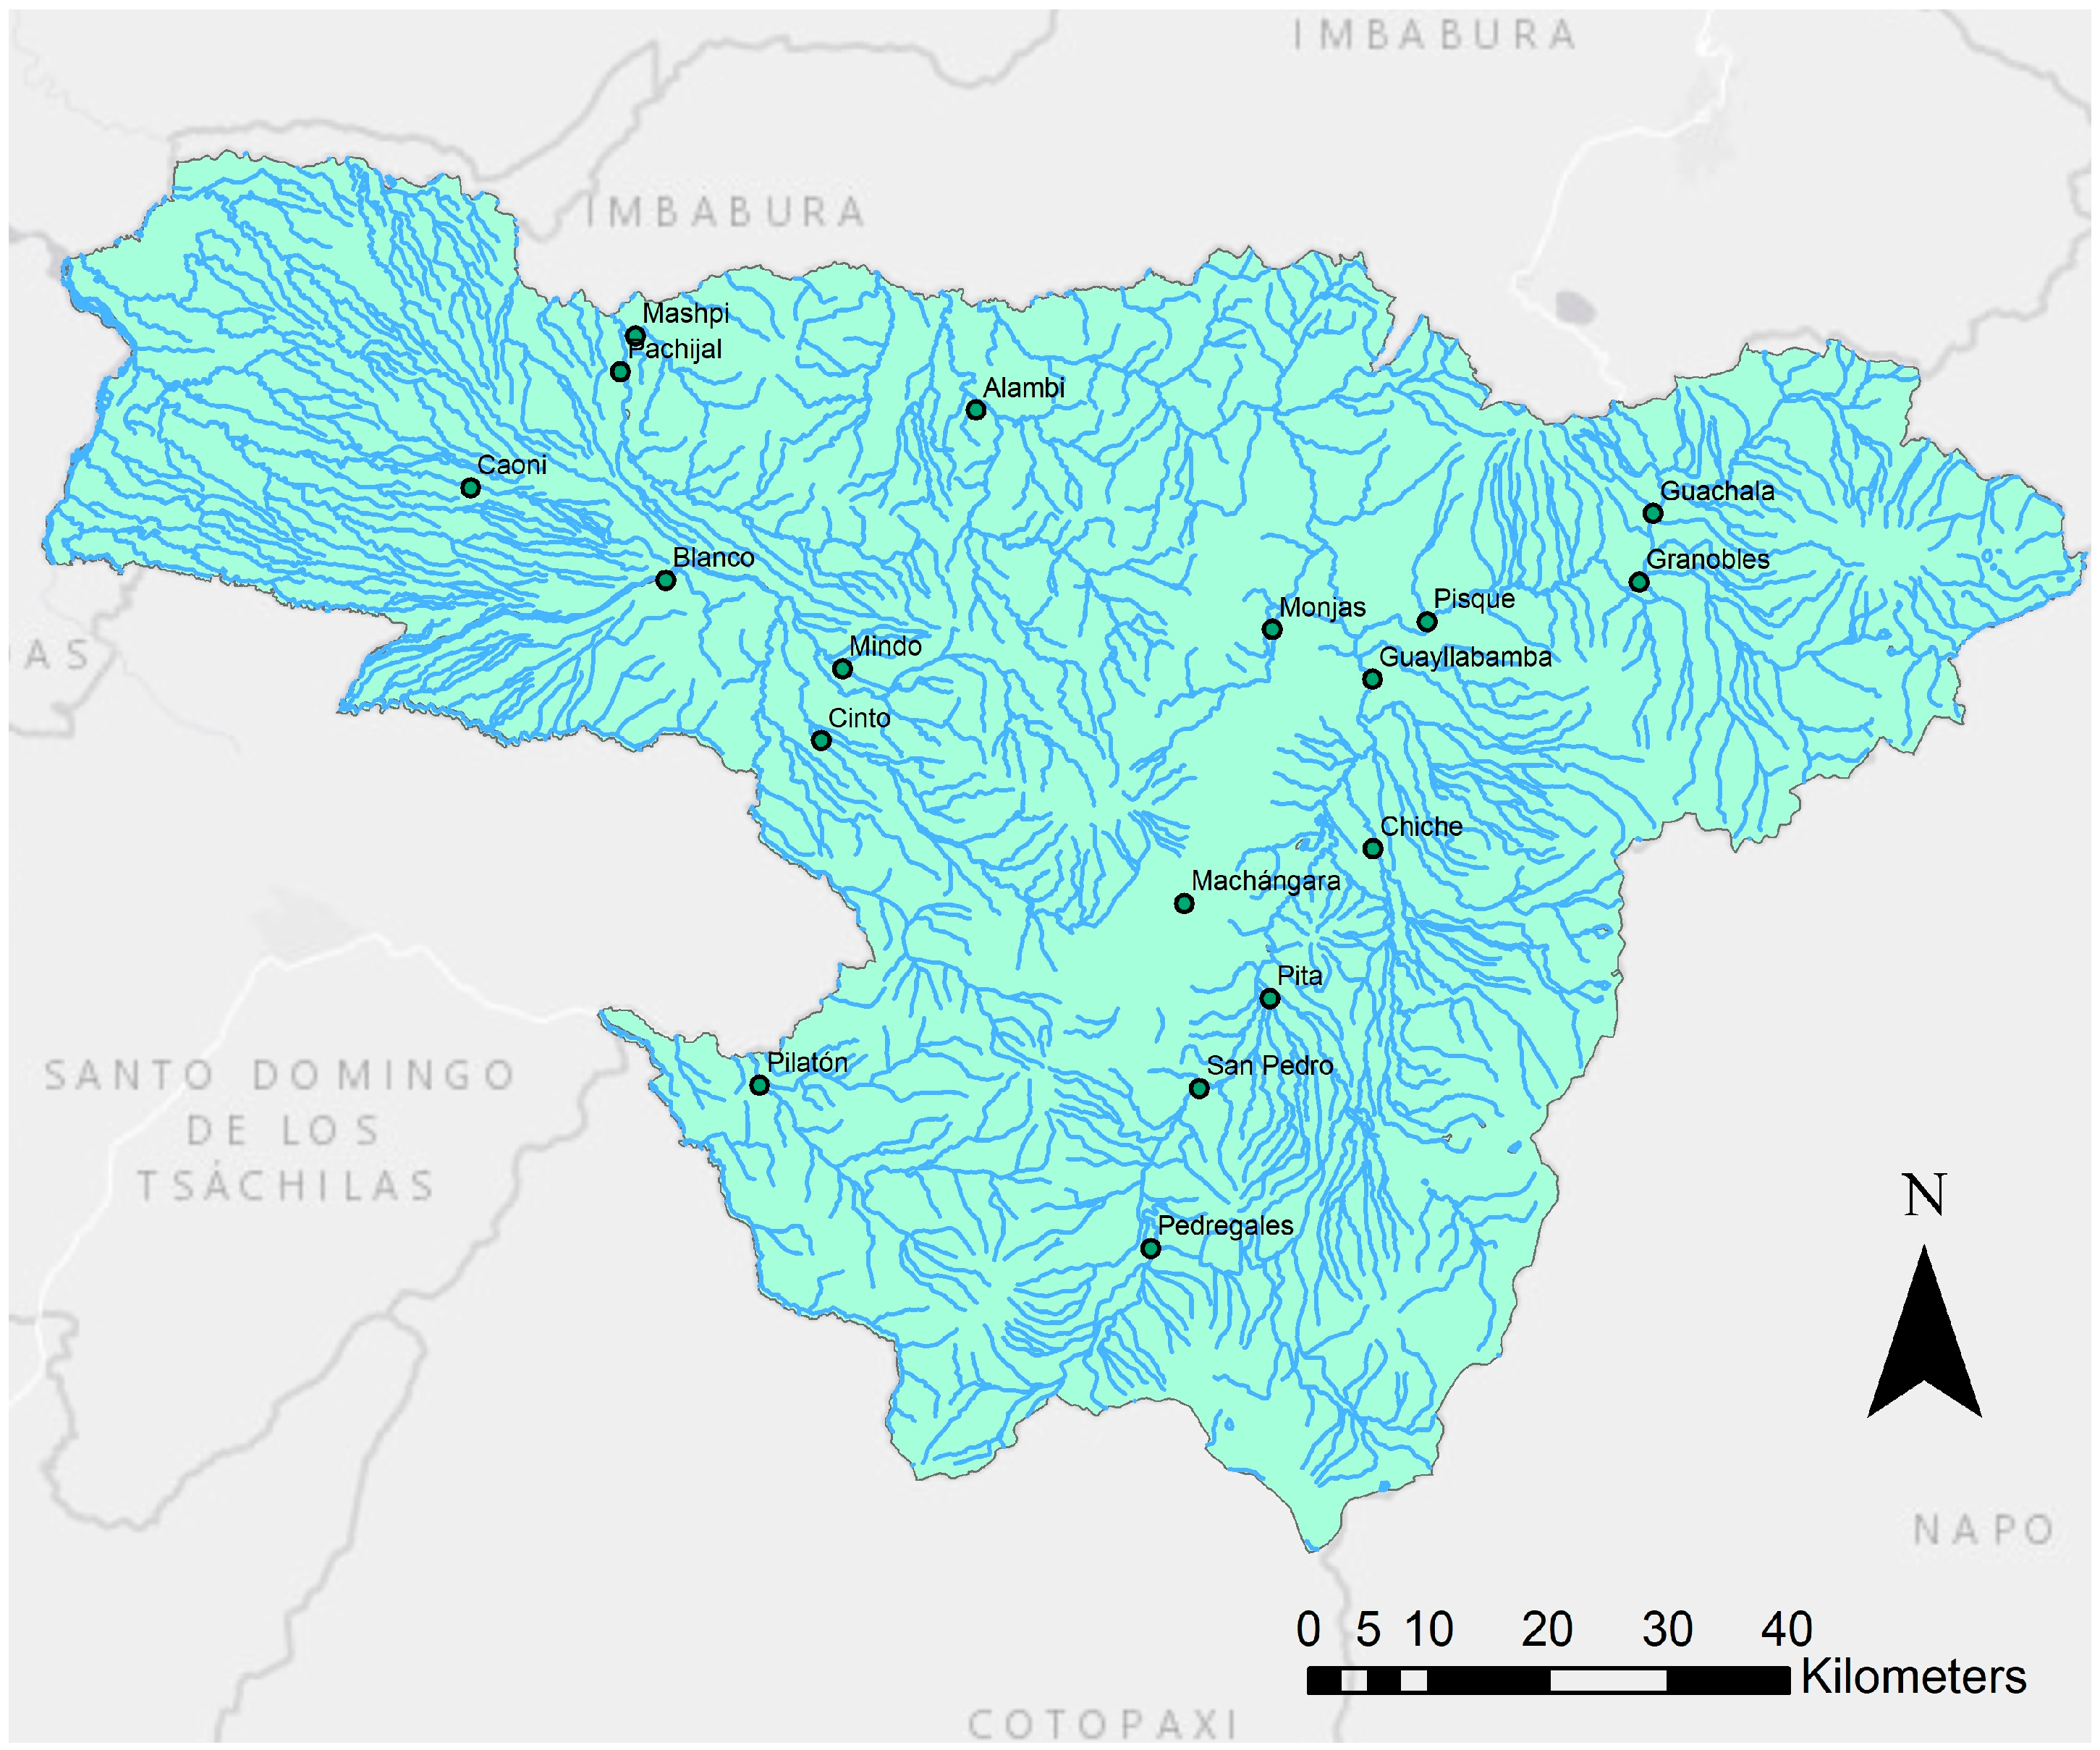 Ijerph Free Full Text Determination Of The Microbial And Chemical Loads In Rivers From The Quito Capital Province Of Ecuador Pichincha A Preliminary Analysis Of Microbial And Chemical Quality Of The Main